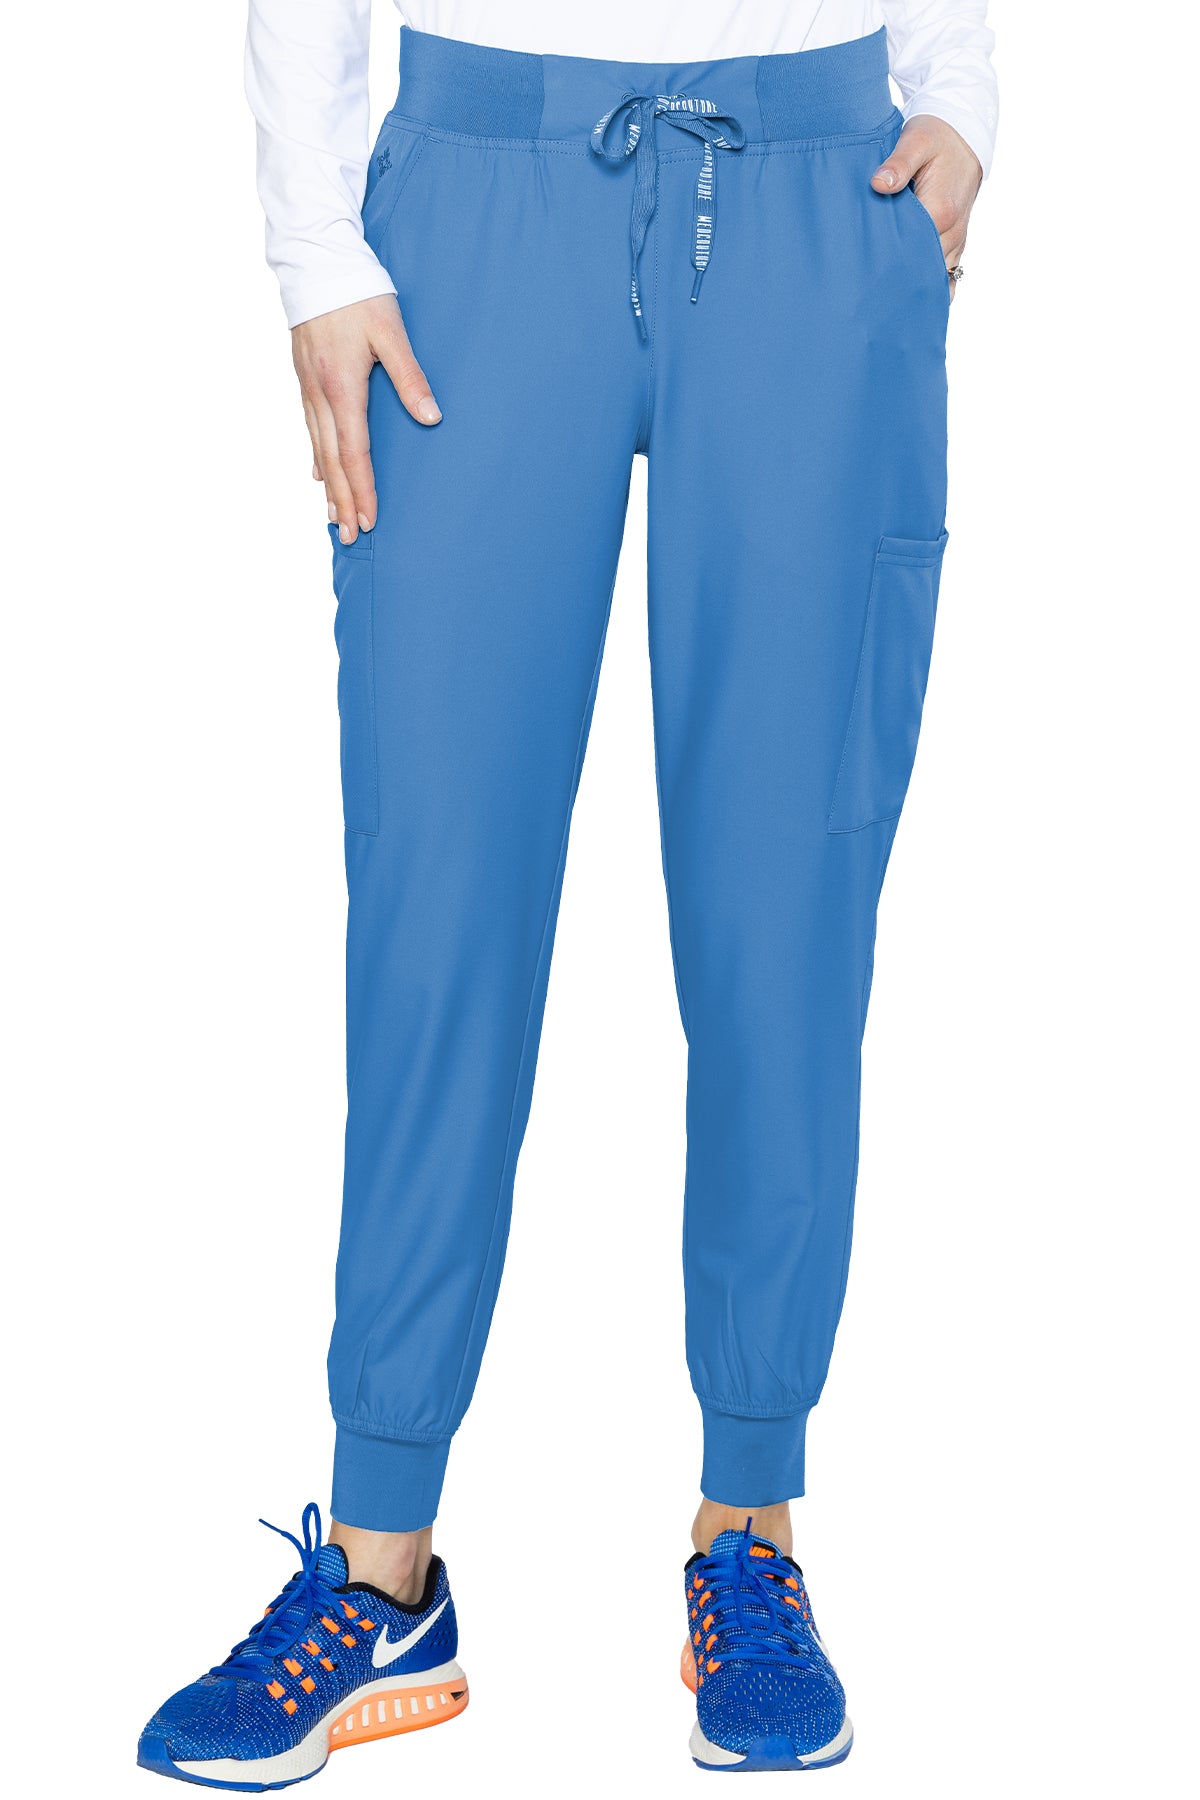 Med Couture Scrub Pants Insight Jogger Pant in Ceil at Parker's Clothing and Shoes.